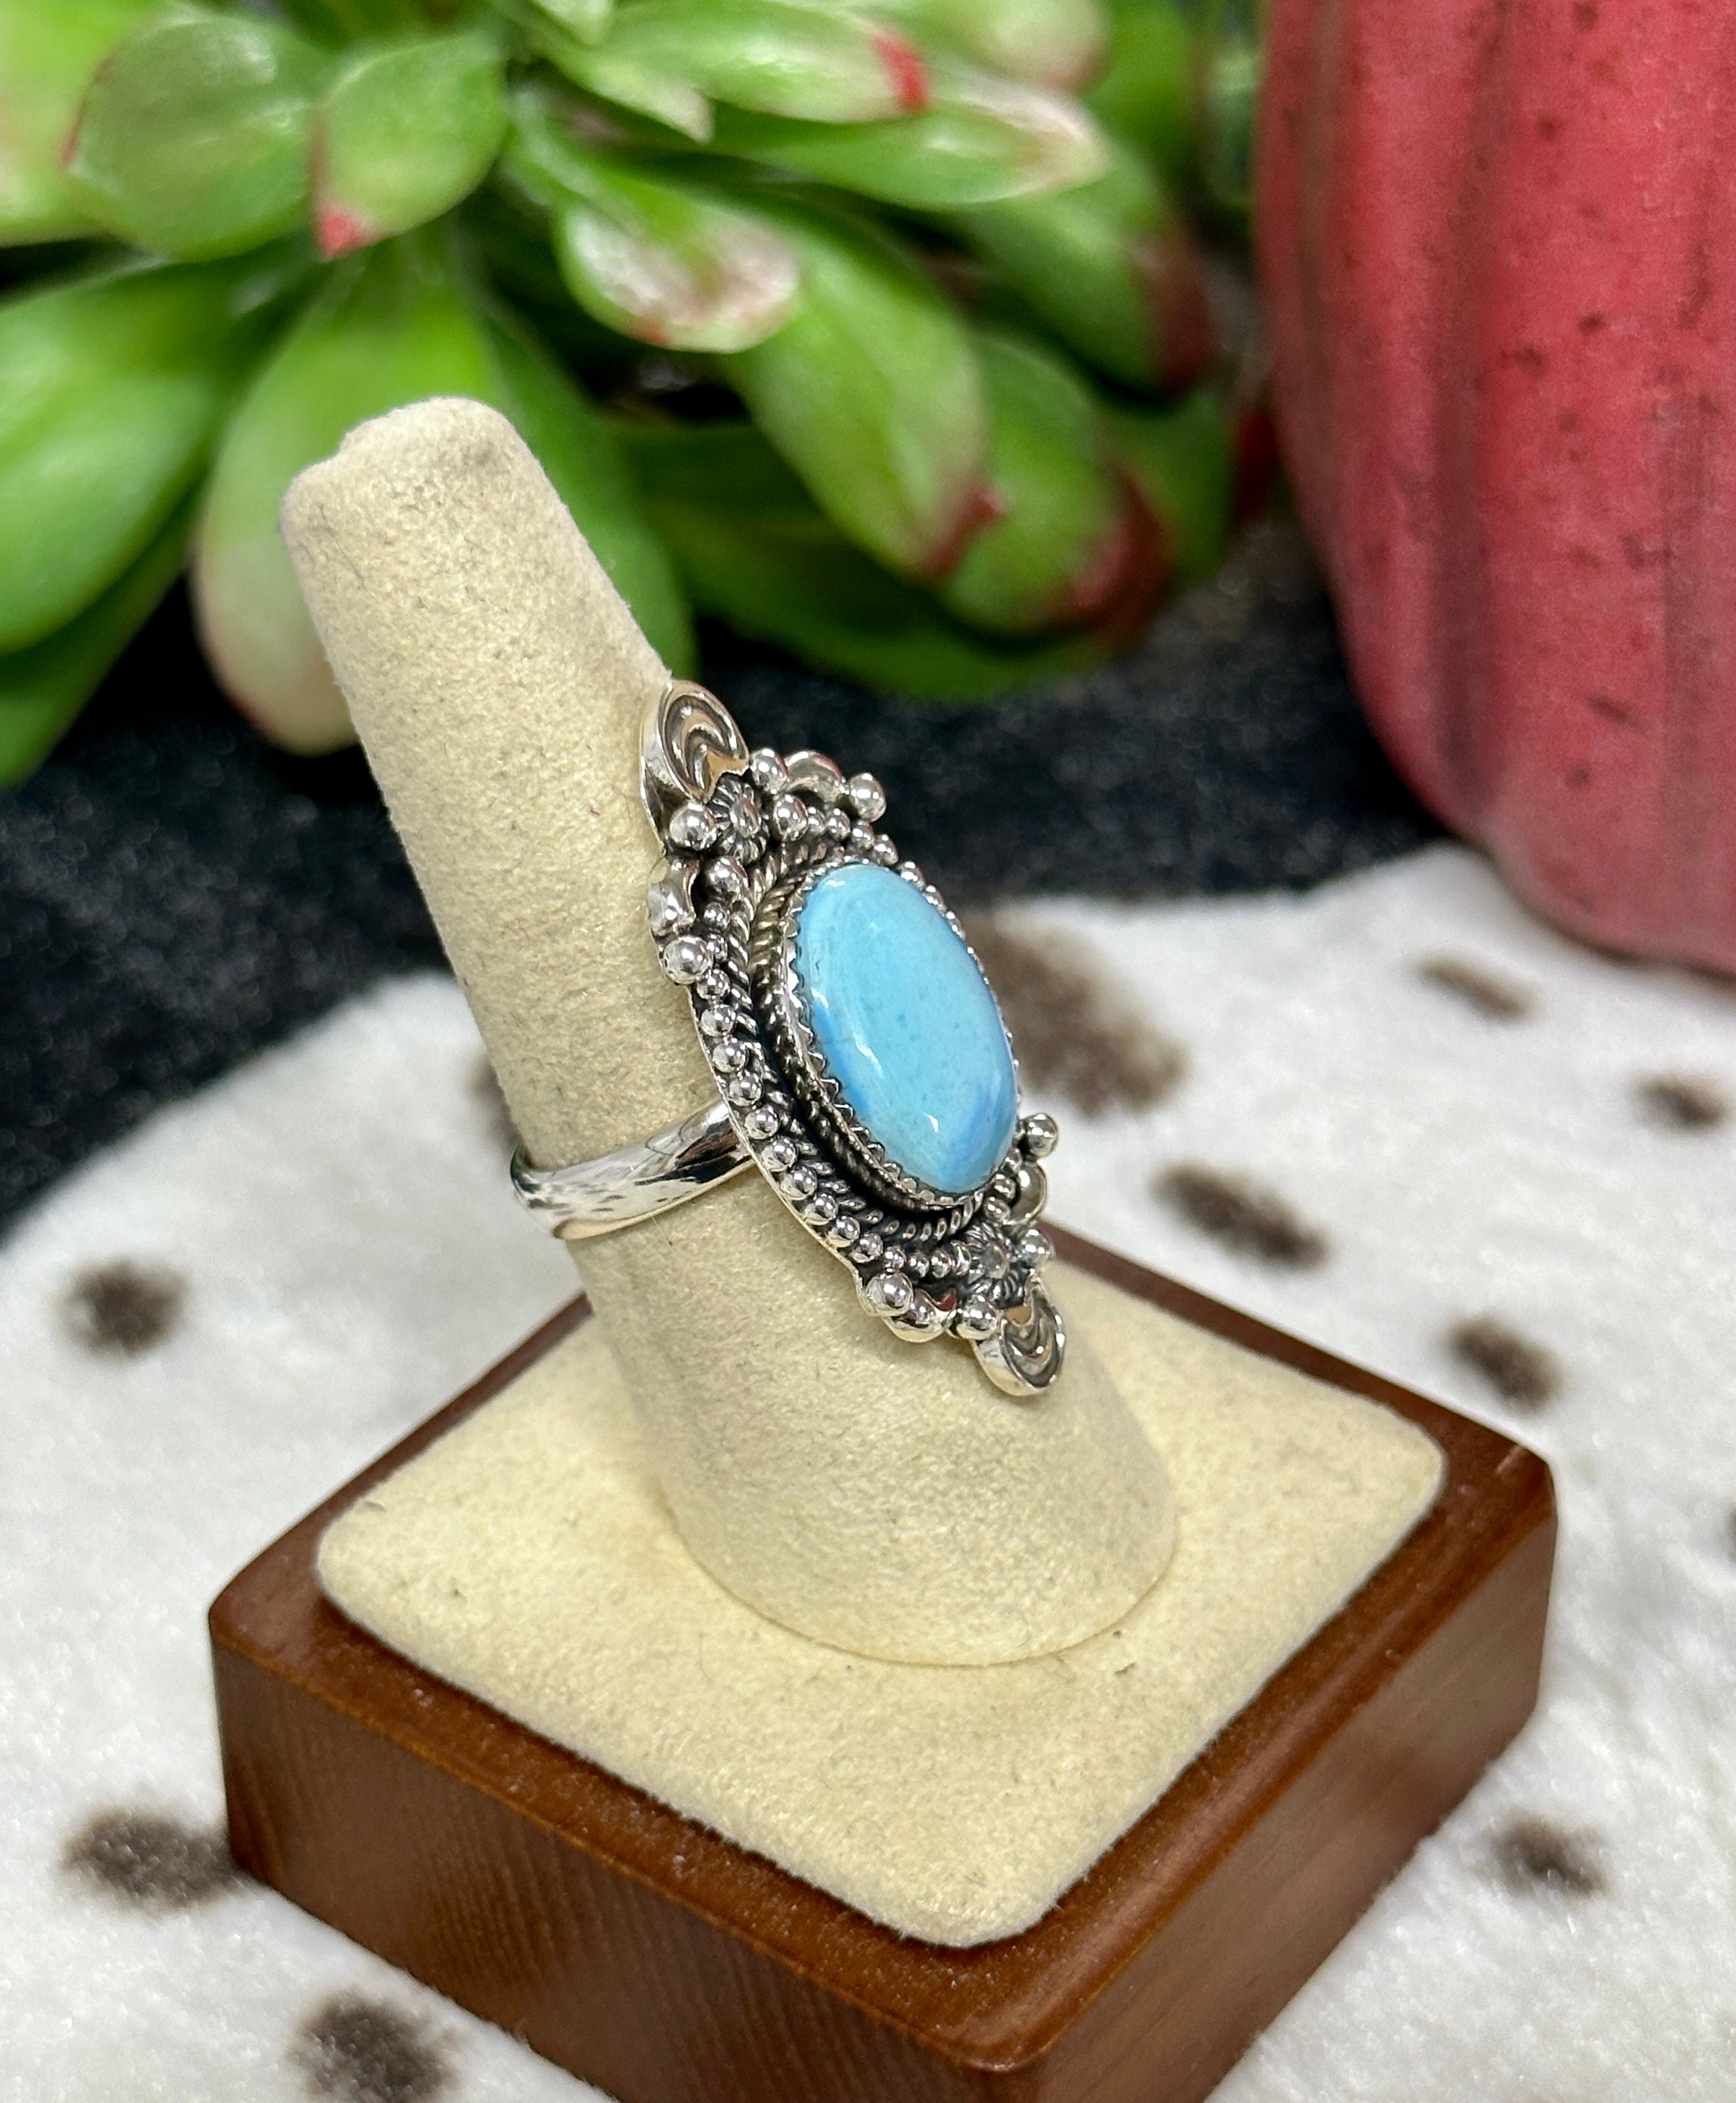 Southwest Handmade Golden Hill’s Turquoise & Sterling Silver Ring Size 7.25